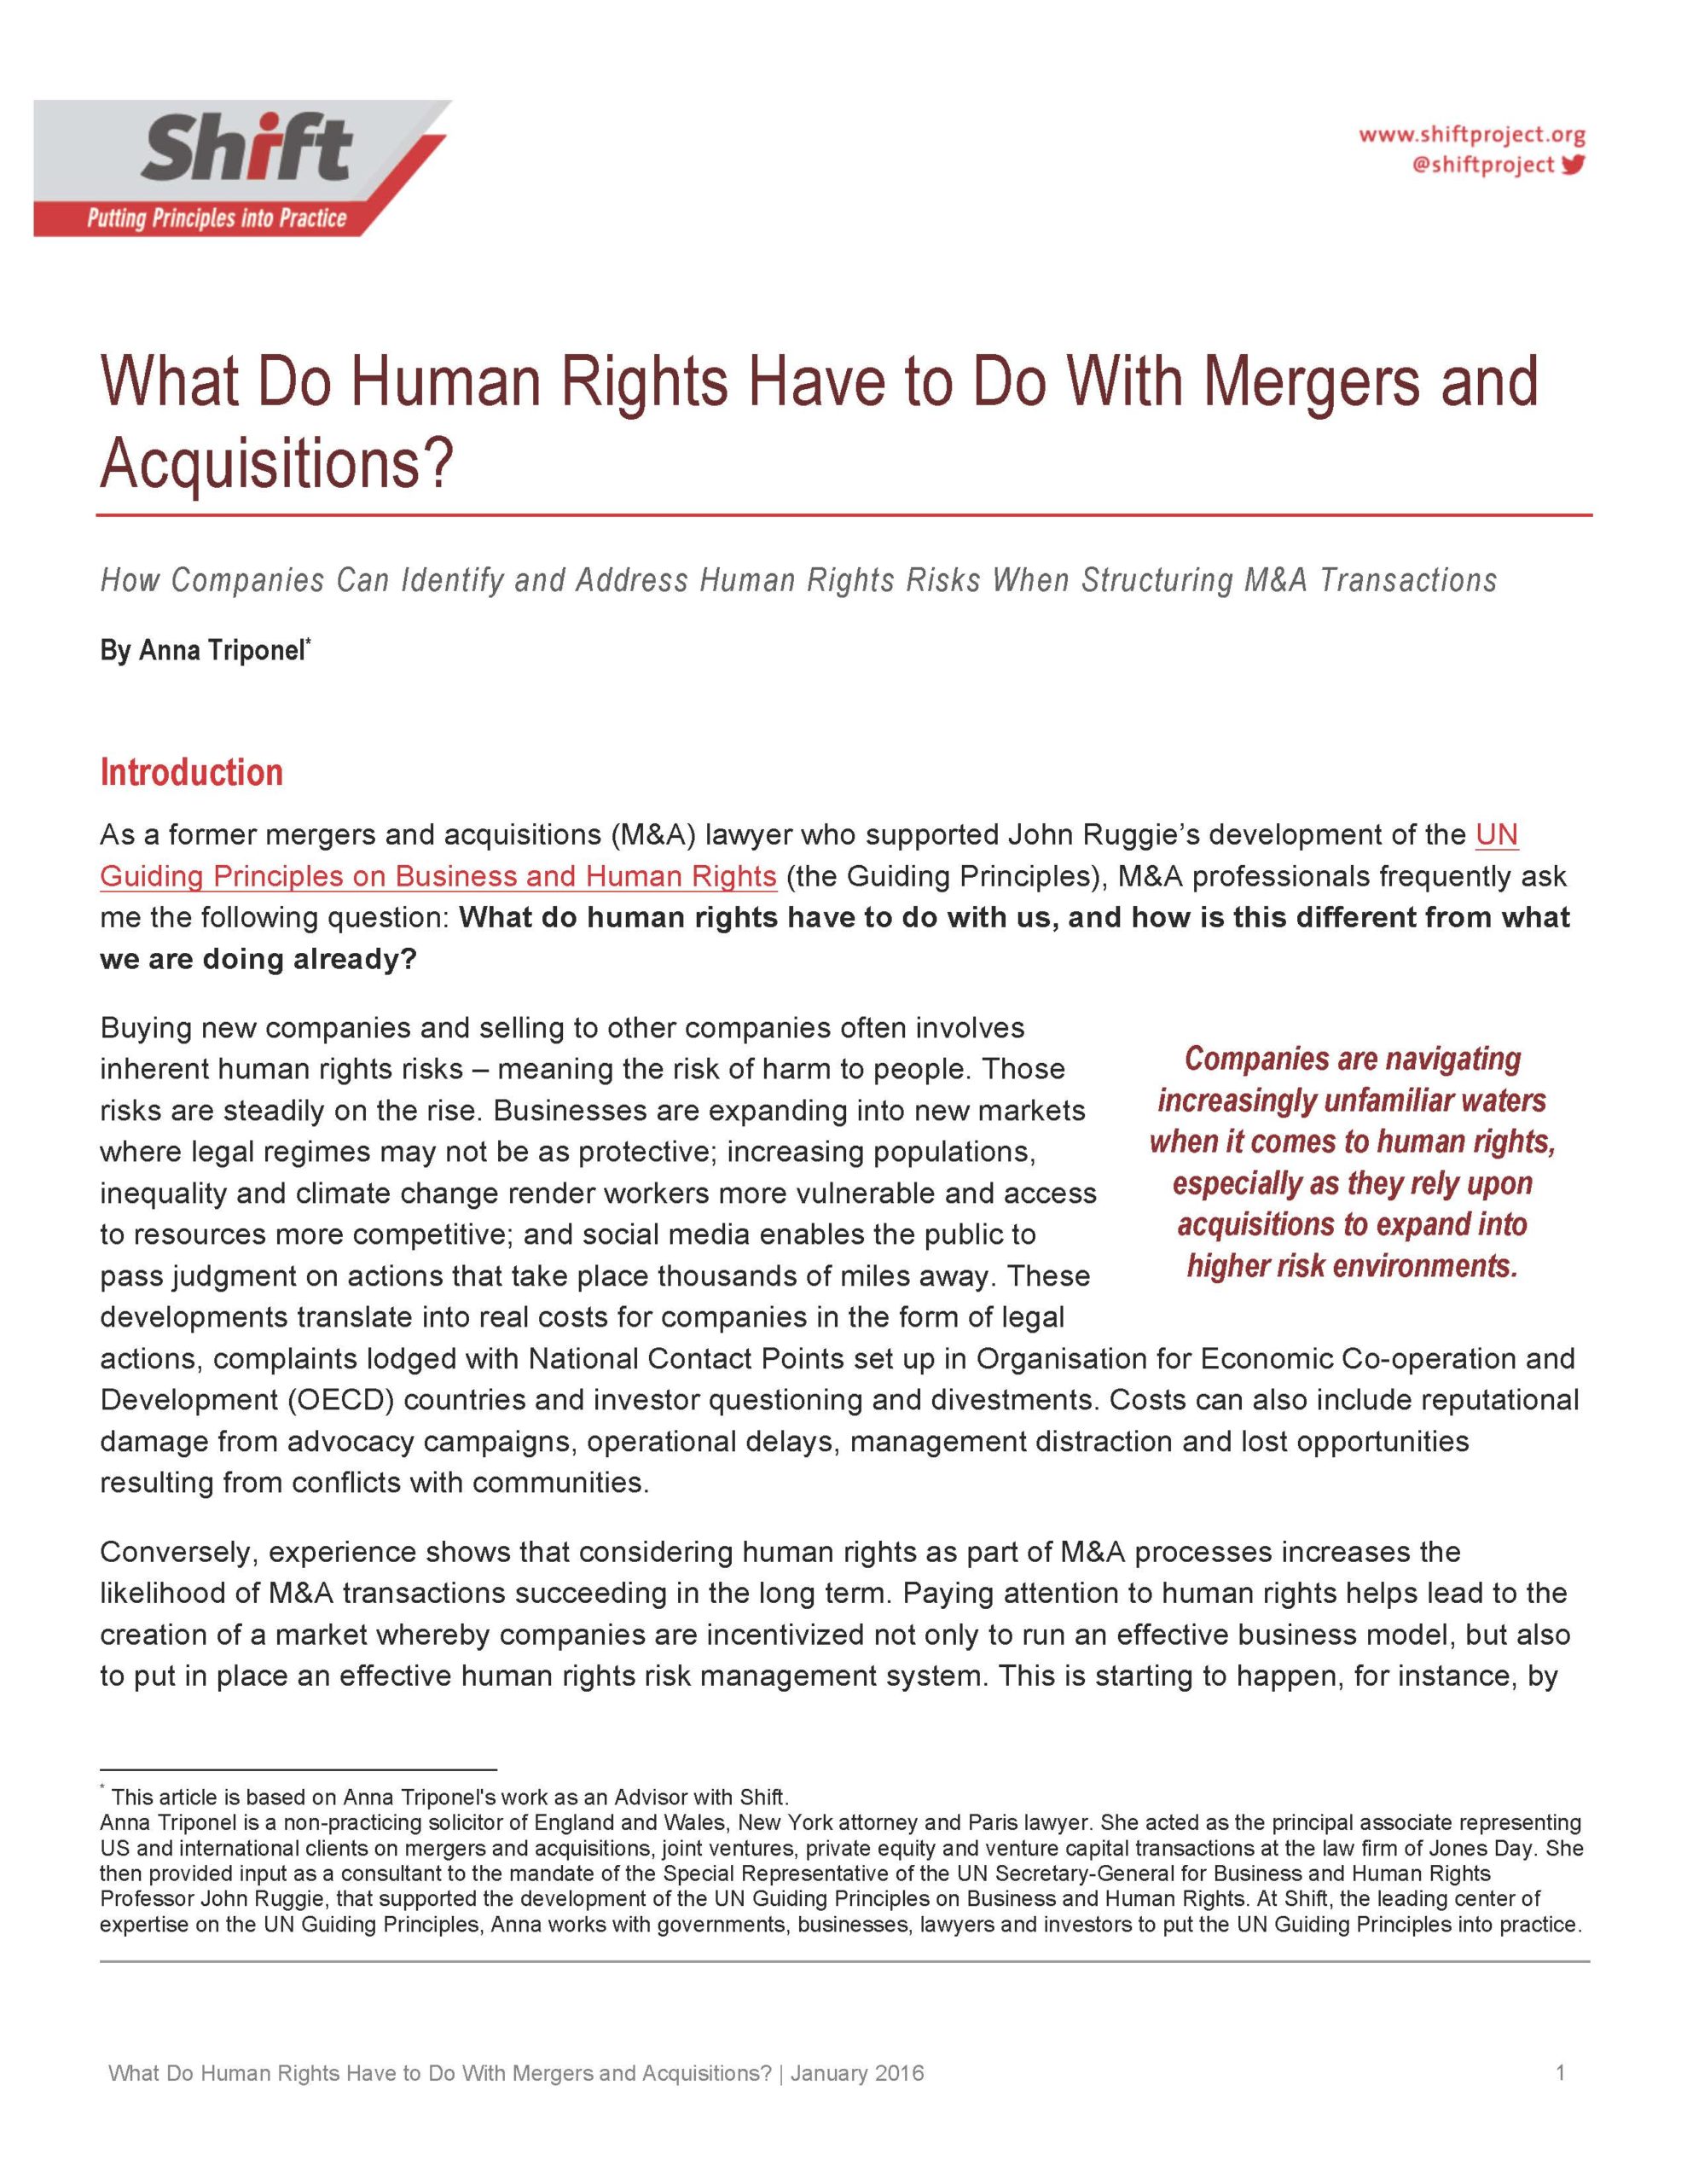 What Do Human Rights Have to Do With Mergers and Acquisitions?